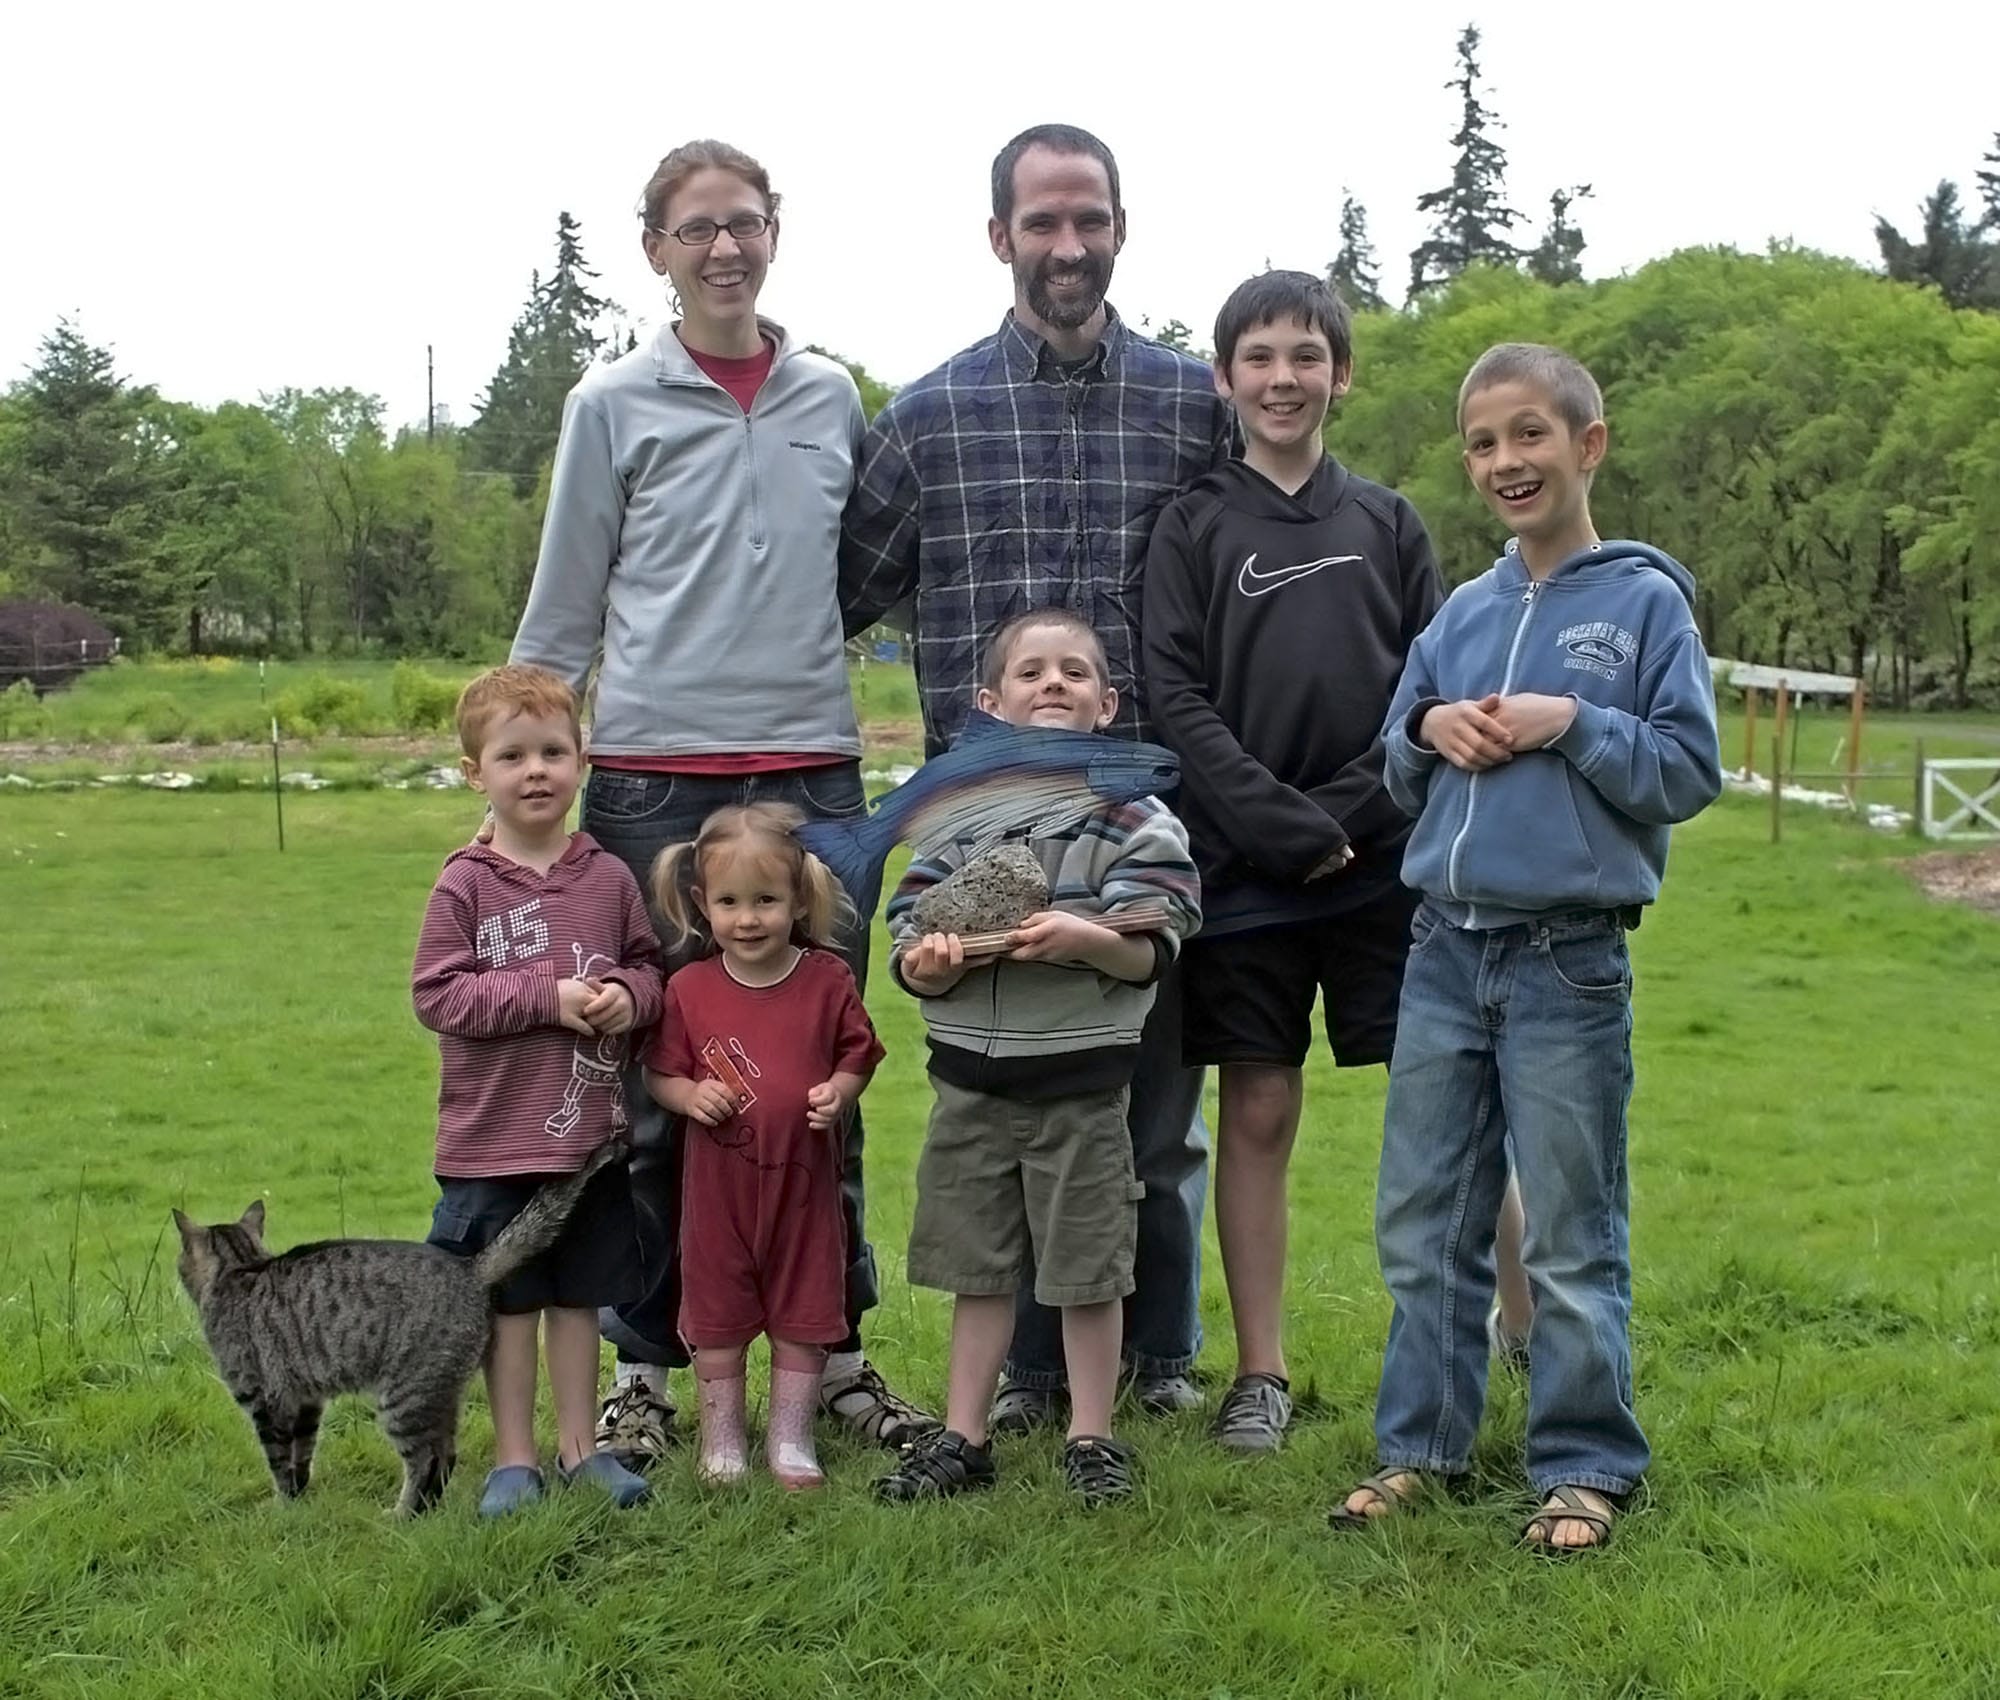 Dollars Corner: The Hoyt family from the Dollars Corner area won Clark County's third-annual WasteBusters competition by cutting their waste by more than 60 percent.